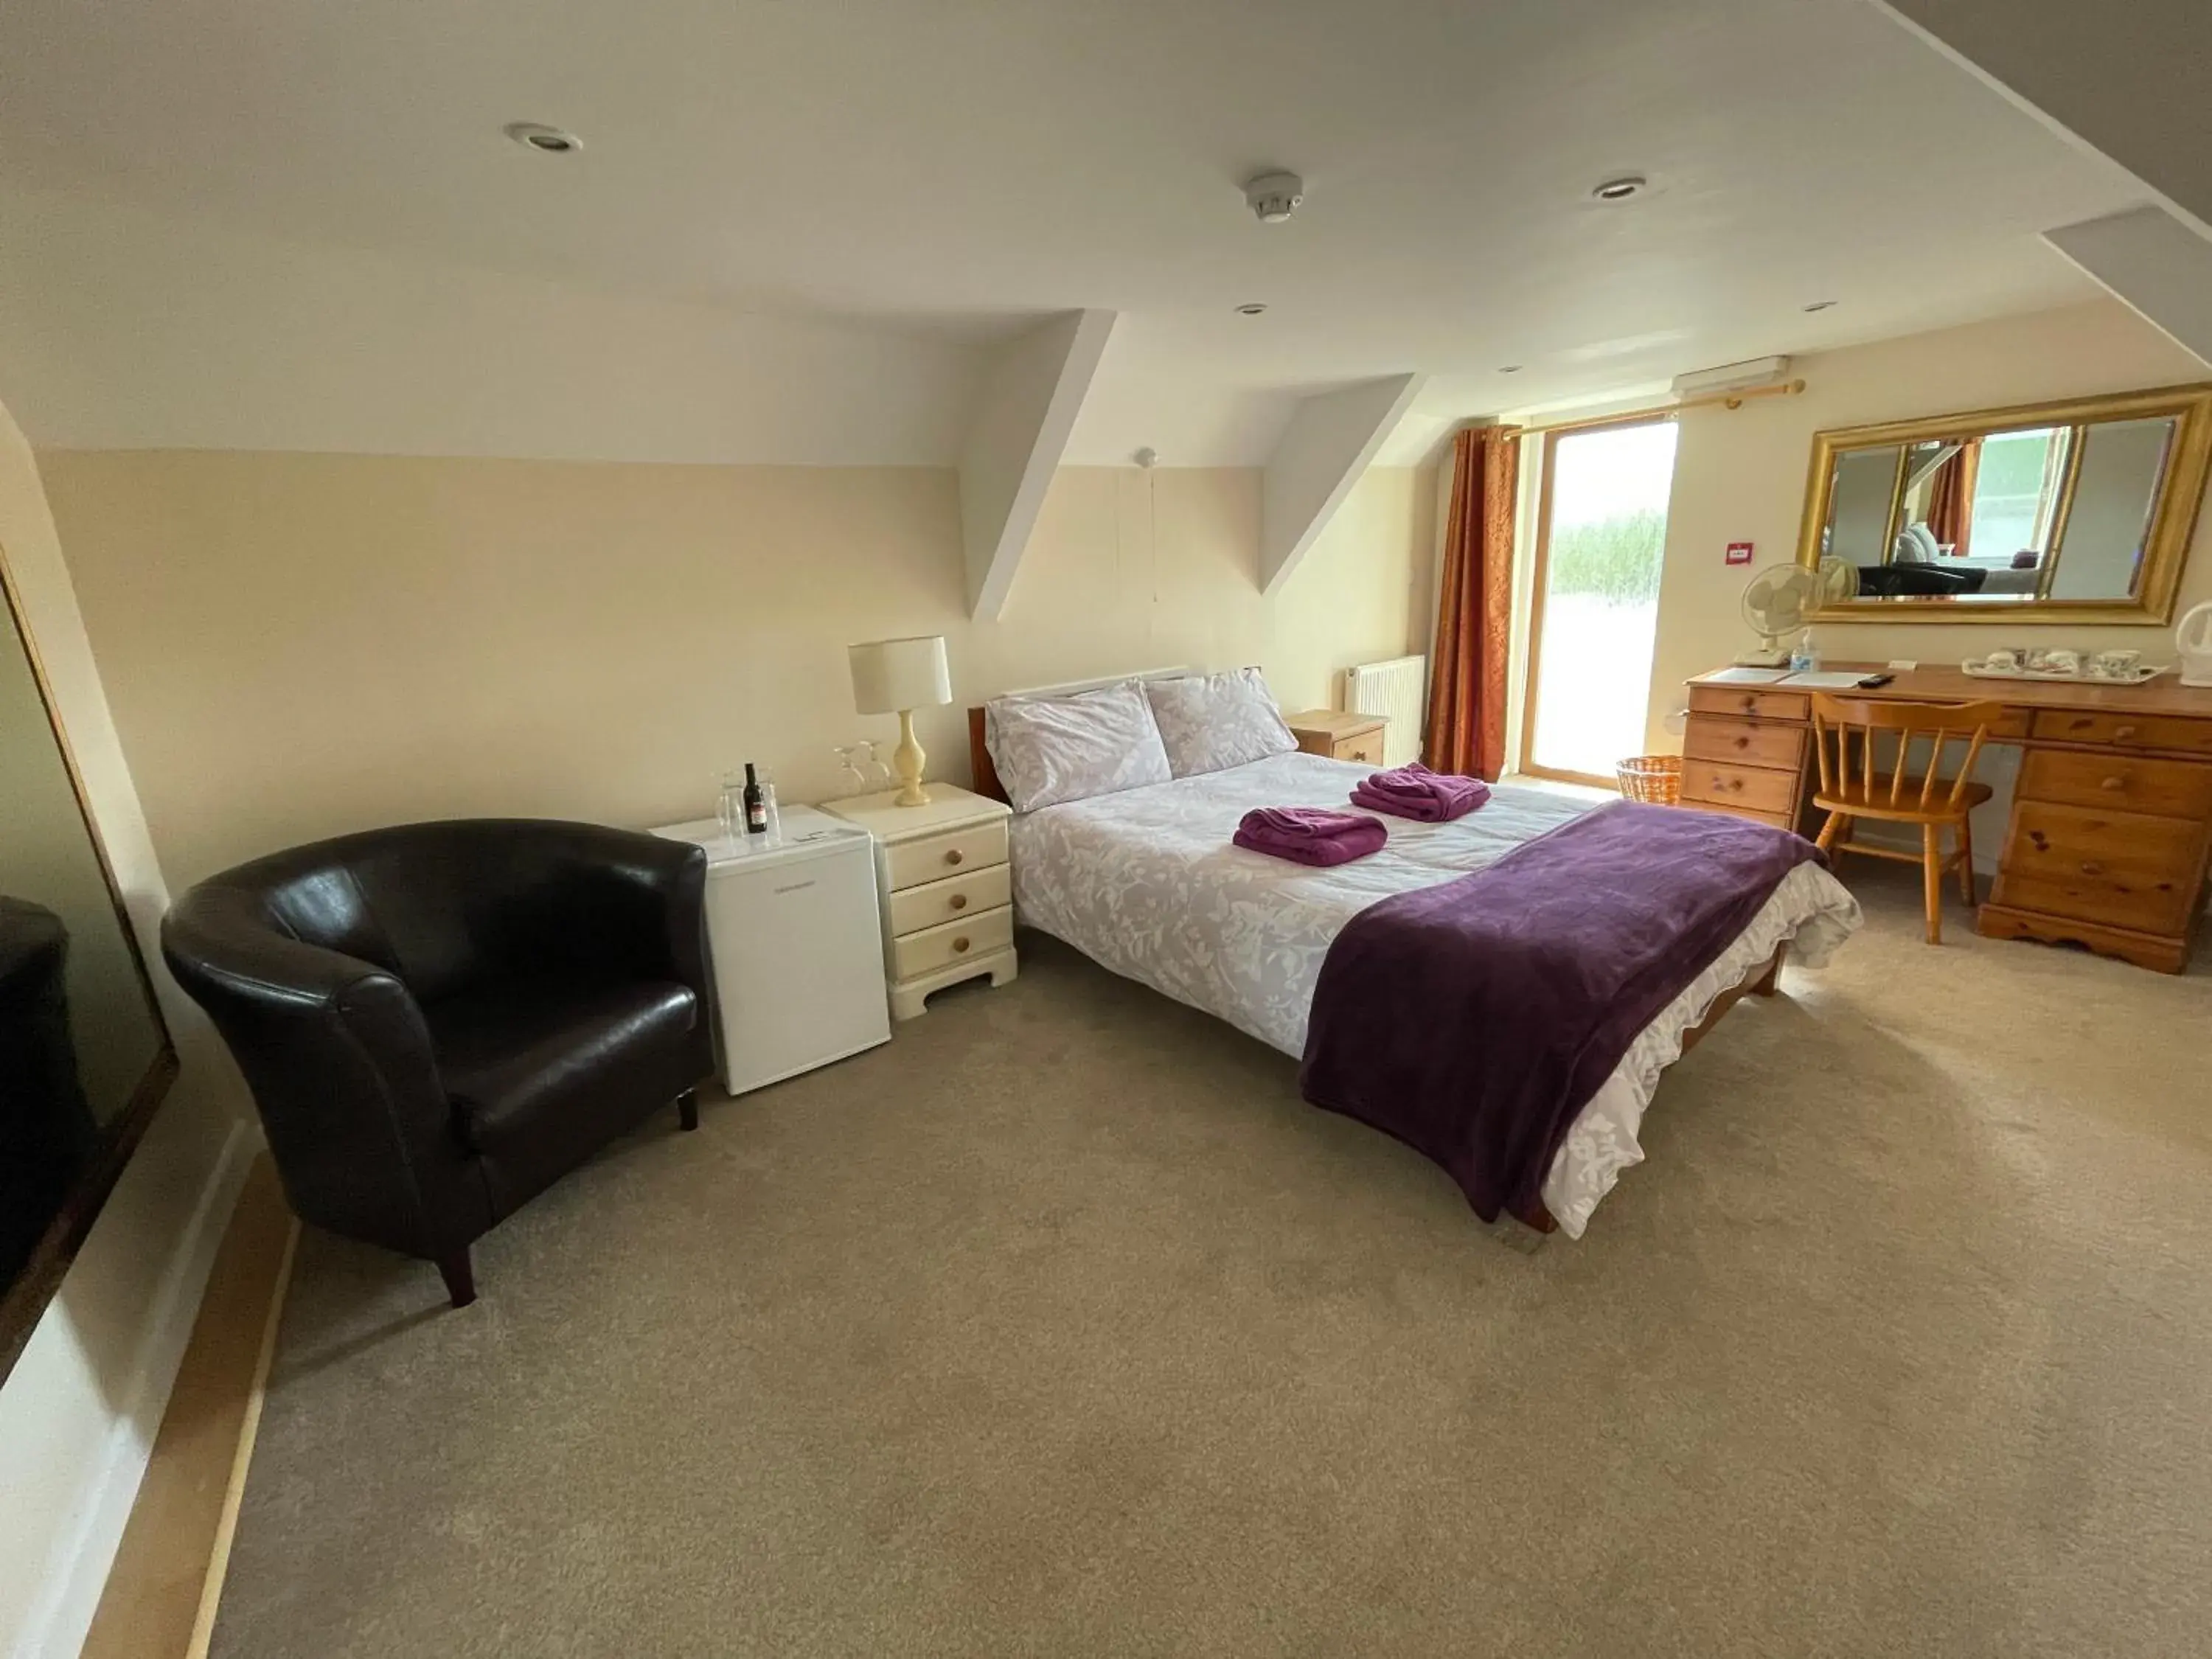 Bedroom in Station House, Dartmoor and Coast located, Village centre Hotel